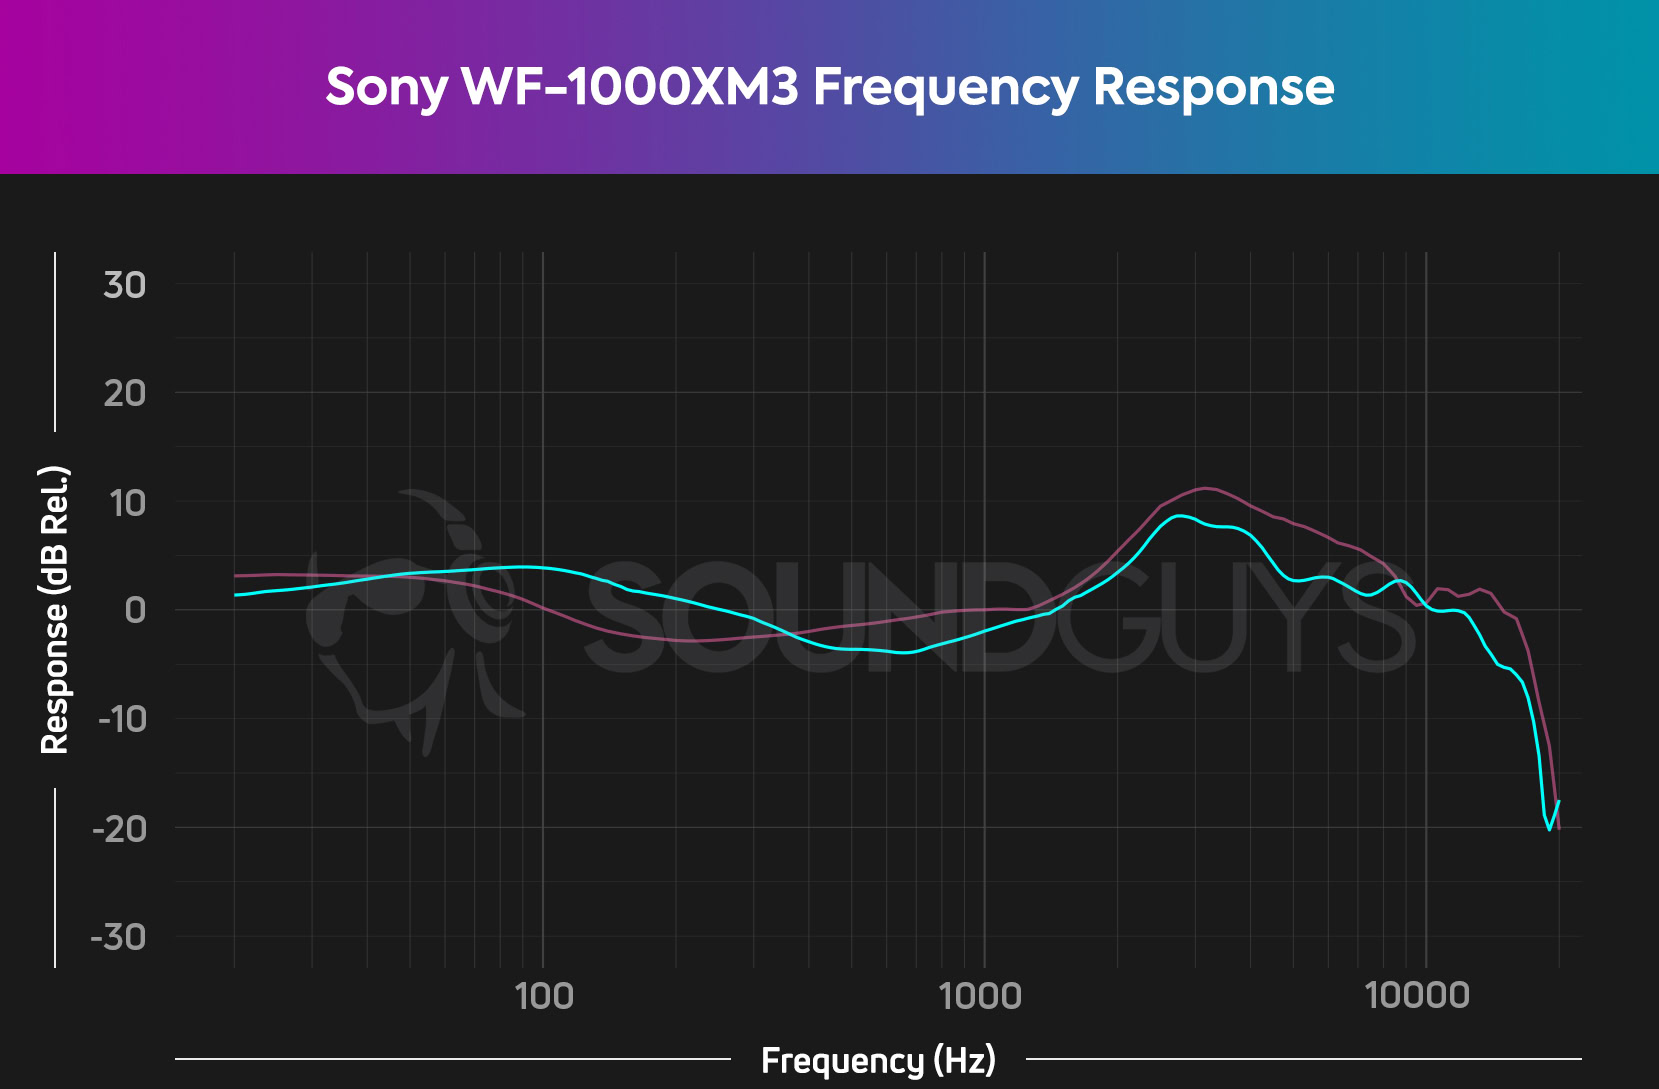 A frequency response chart for the Sony WF-1000XM3 noise-cancelling true wireless earphones.